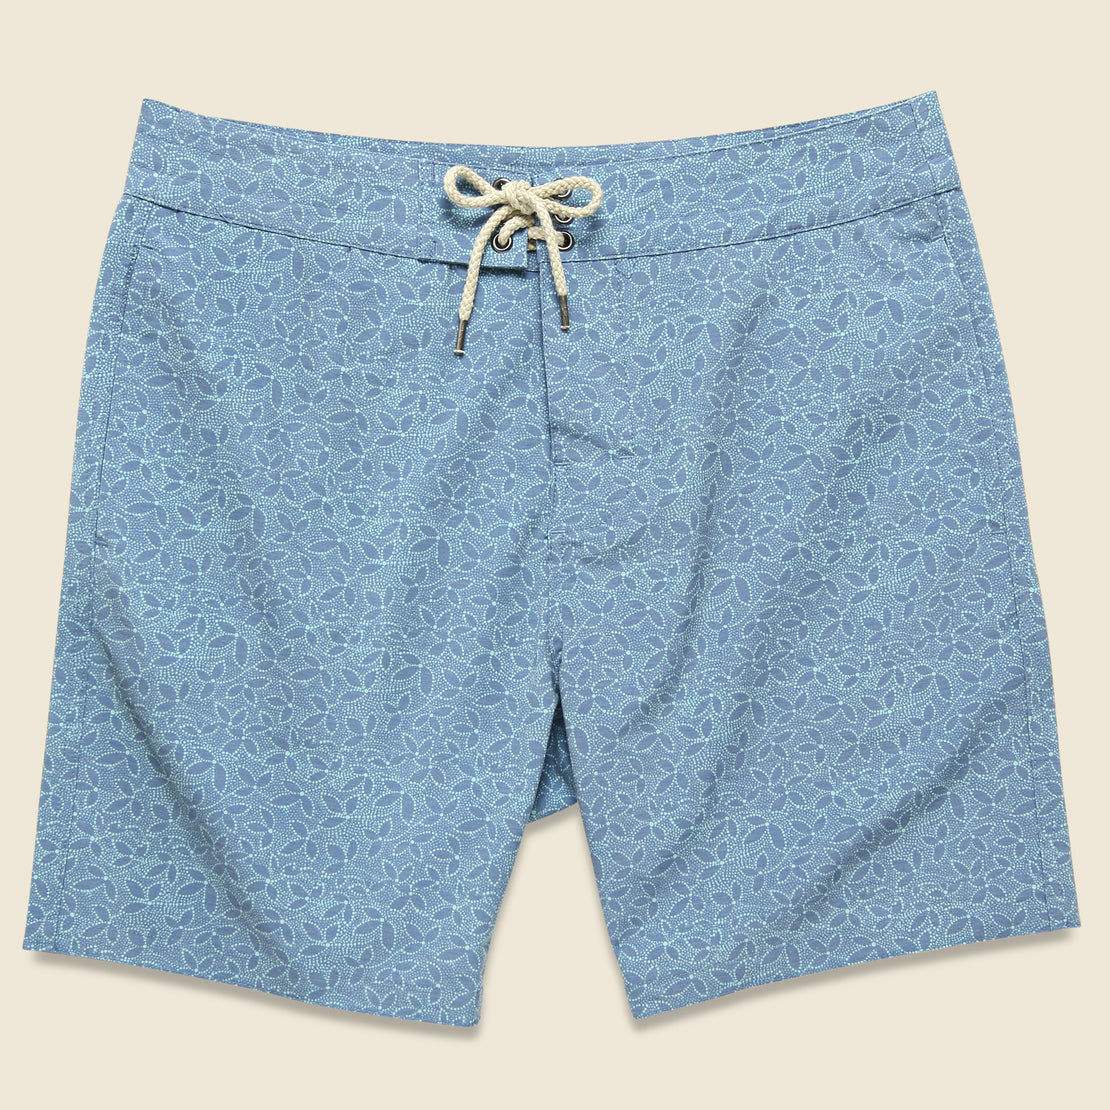 Faherty Classic 7" Boardshort - Teal Ivy